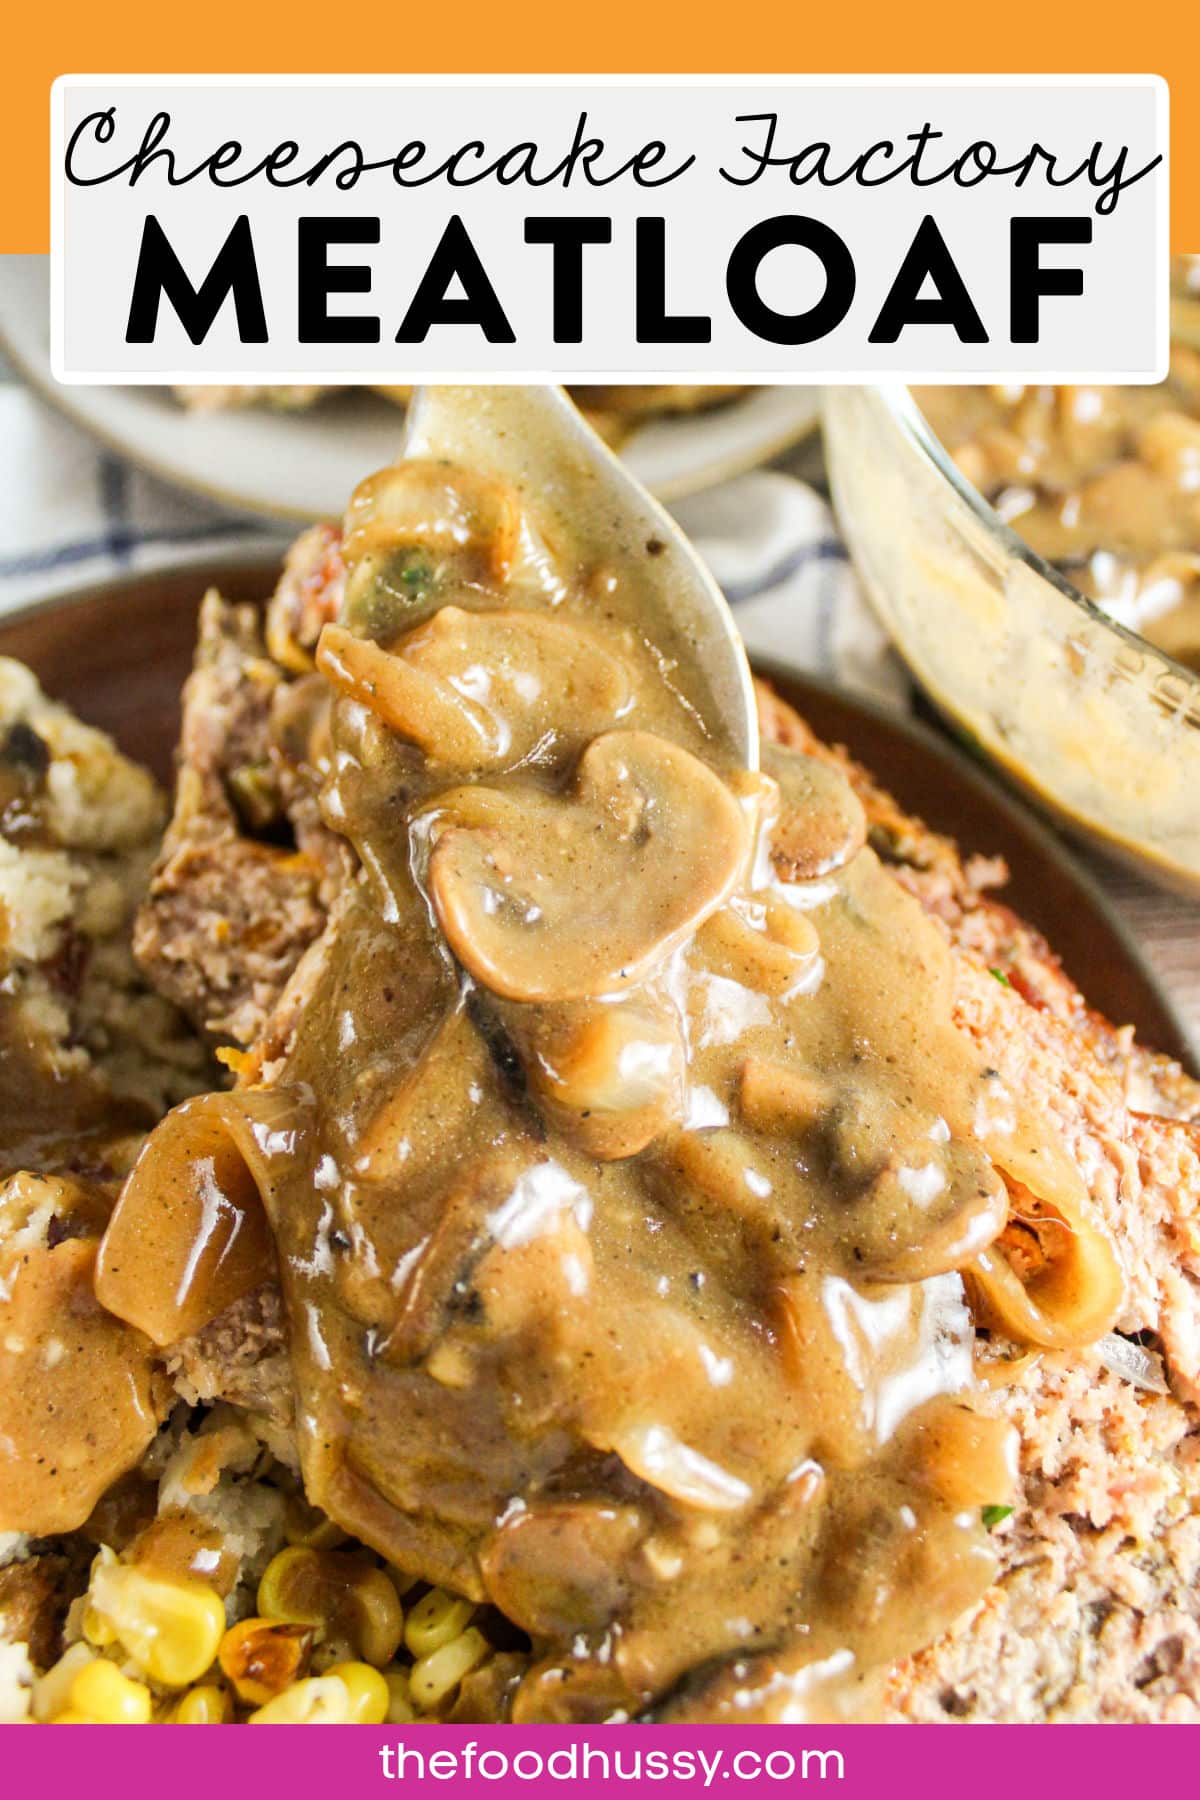 This Copycat Cheesecake Factory Meatloaf is spot on - loaded with ground beef & pork, veggies and the perfect blend of seasonings. And no worries - it's also smothered in a rich brown gravy filled with sauteed onions and mushrooms! Comfort food at its best! via @foodhussy